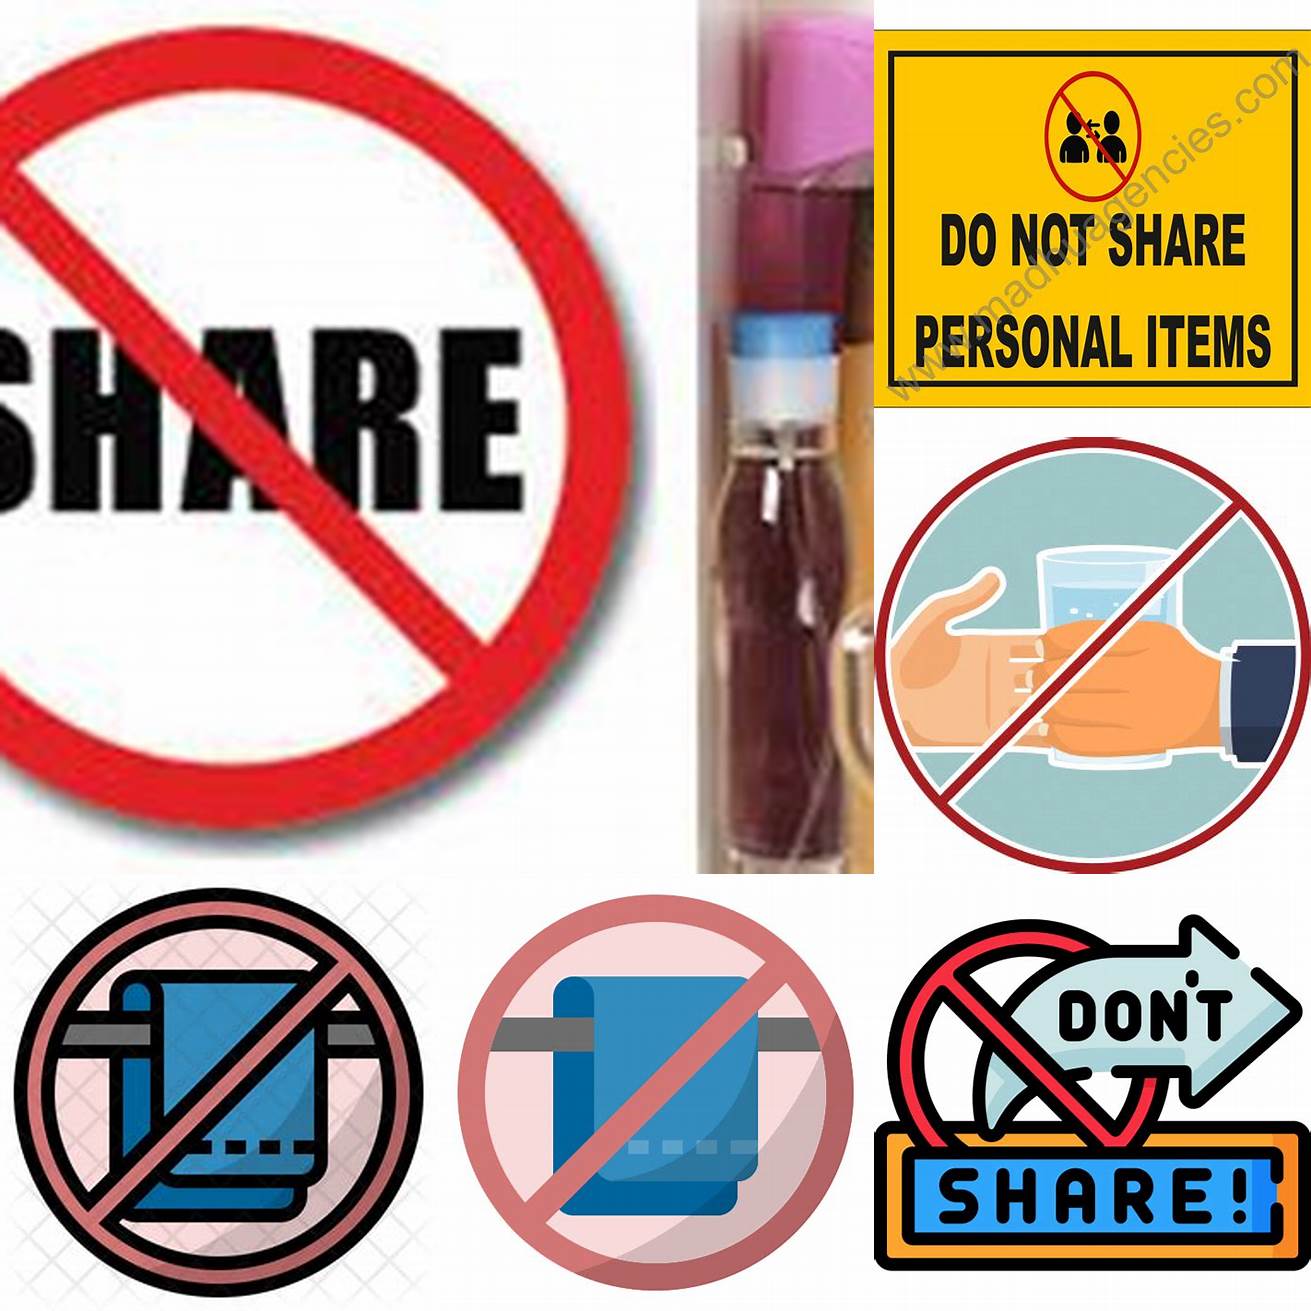 Avoid sharing personal items